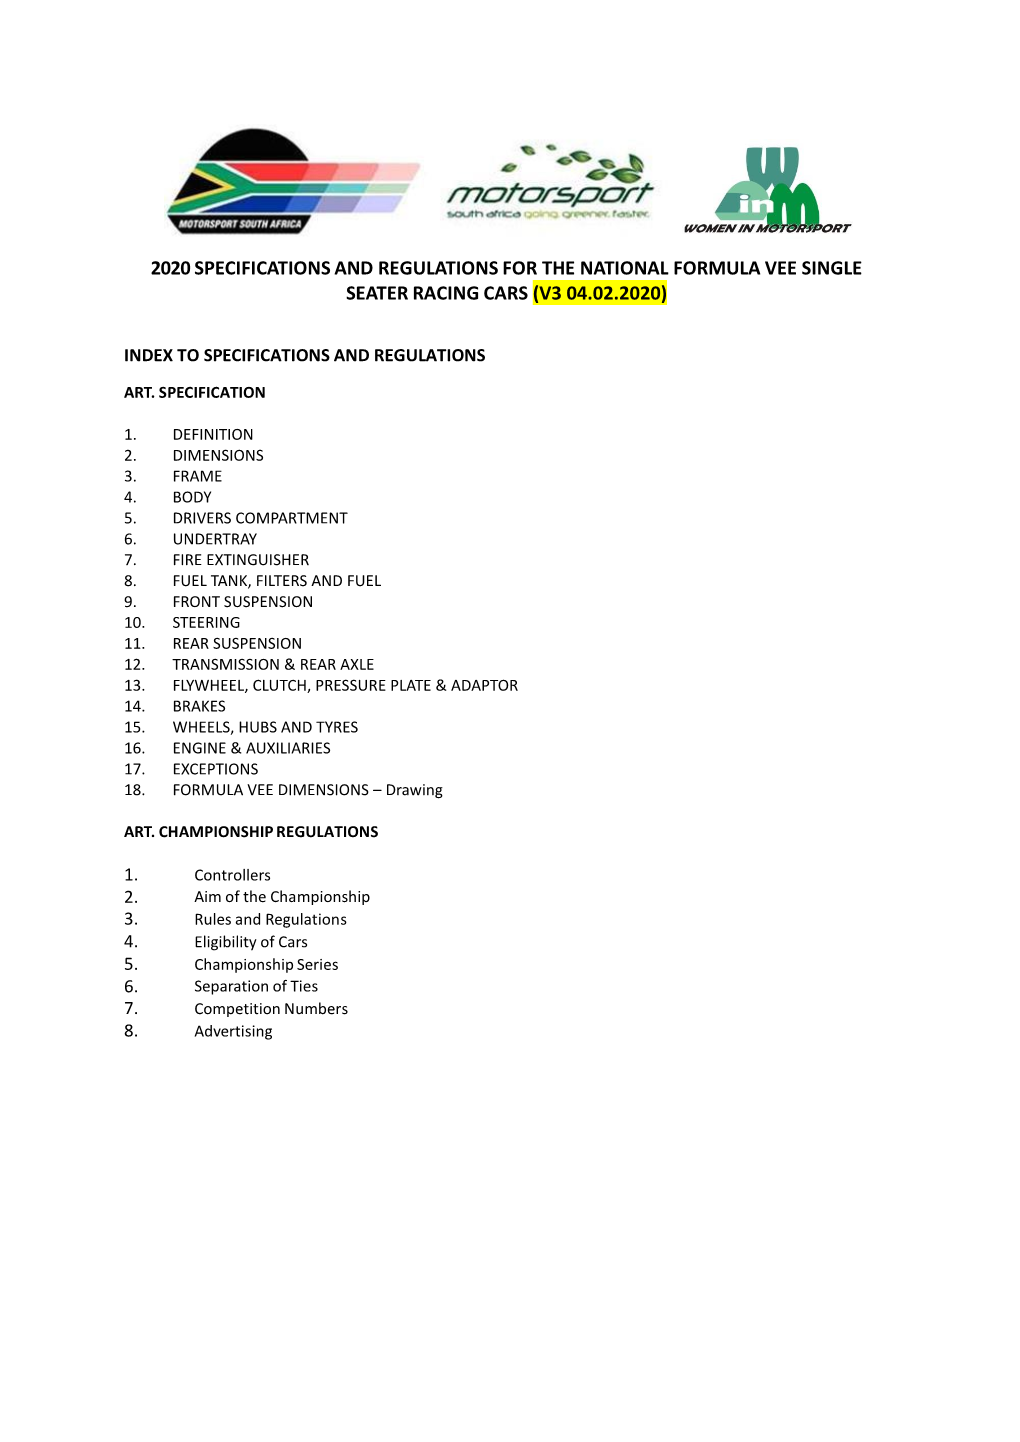 2020 Specifications and Regulations for the National Formula Vee Single Seater Racing Cars (V3 04.02.2020)